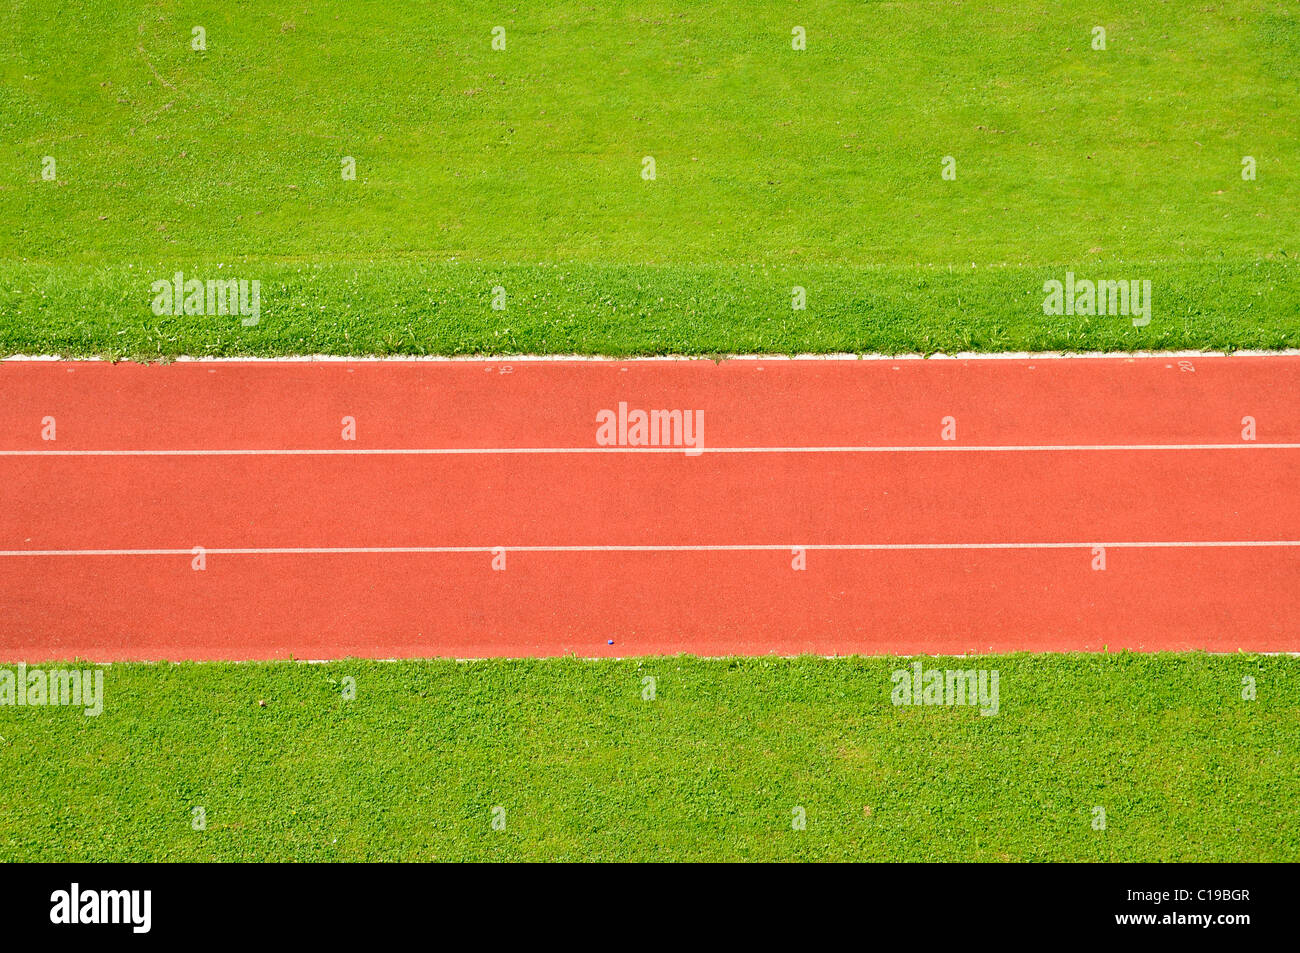 Straight running track, race track, sprint track, markings, red, green, lawn, sports ground Stock Photo